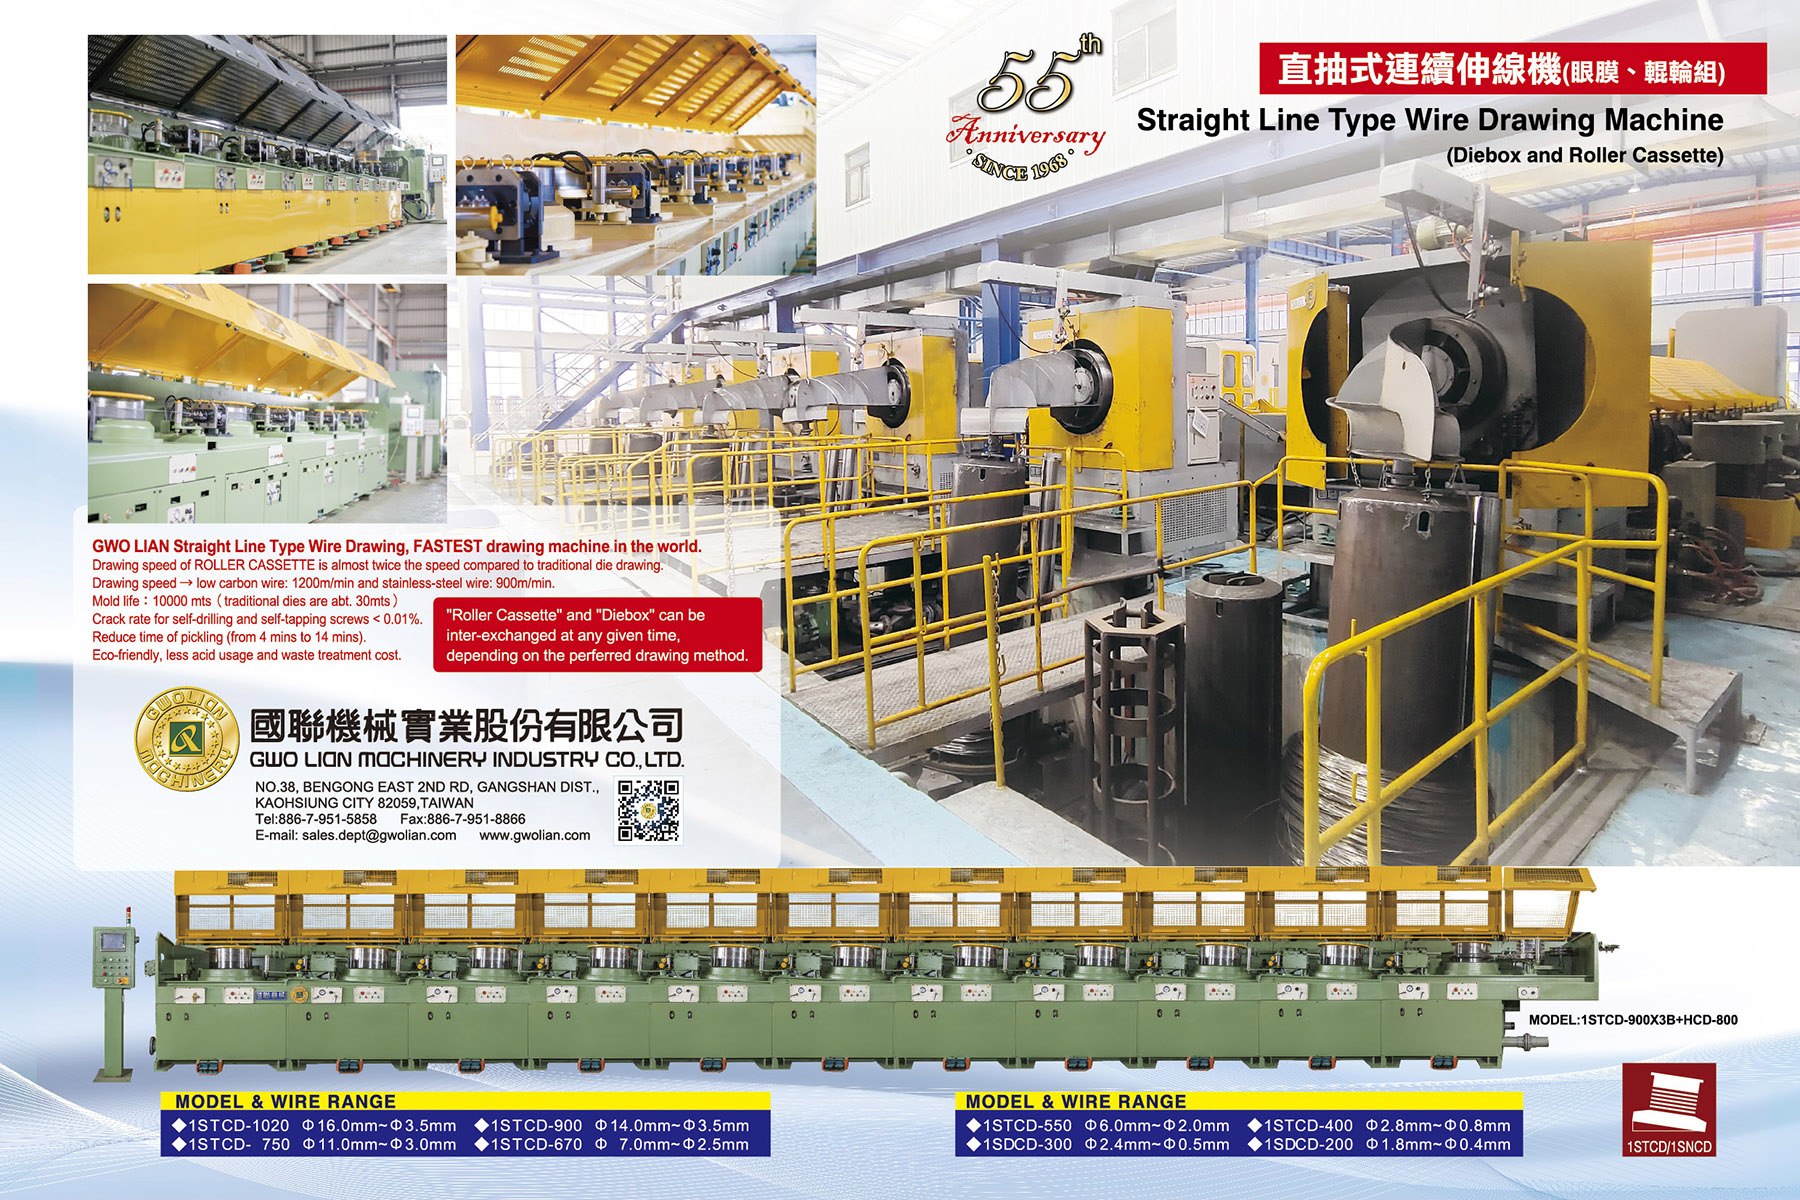 GWO LIAN MACHINERY INDUSTRY CO., LTD.  , 1. Straight Line Type Wire Cold Rolling Drawing Machine (1 SDRD)2. Straight Line Type Wire Machine (1 STCD / SDCD)3. Storage Type Wire Drawing Machine     A. Vertical Type Single Deck Continuous           Wire Drawing Machine (1 VCDA)     B. Vertical Type Double Deck Continuous          Wire Drawing Machine (2 VCD)4. Handstand Type Wire Drawing Machine (One Die Block) (HCD)5. Wet Type Continuous Wire Drawing Machine (MT / FTHS)6. Non-Stop Coiler with one die block (FCD)7. Non-Stop Coiler (FCD)8. Non-Stop Coiler for Skinpass (FCD)9. Spooler (SPC)10. Multi-Wire Coiler/Spooler/ Pay-Off and Wire C